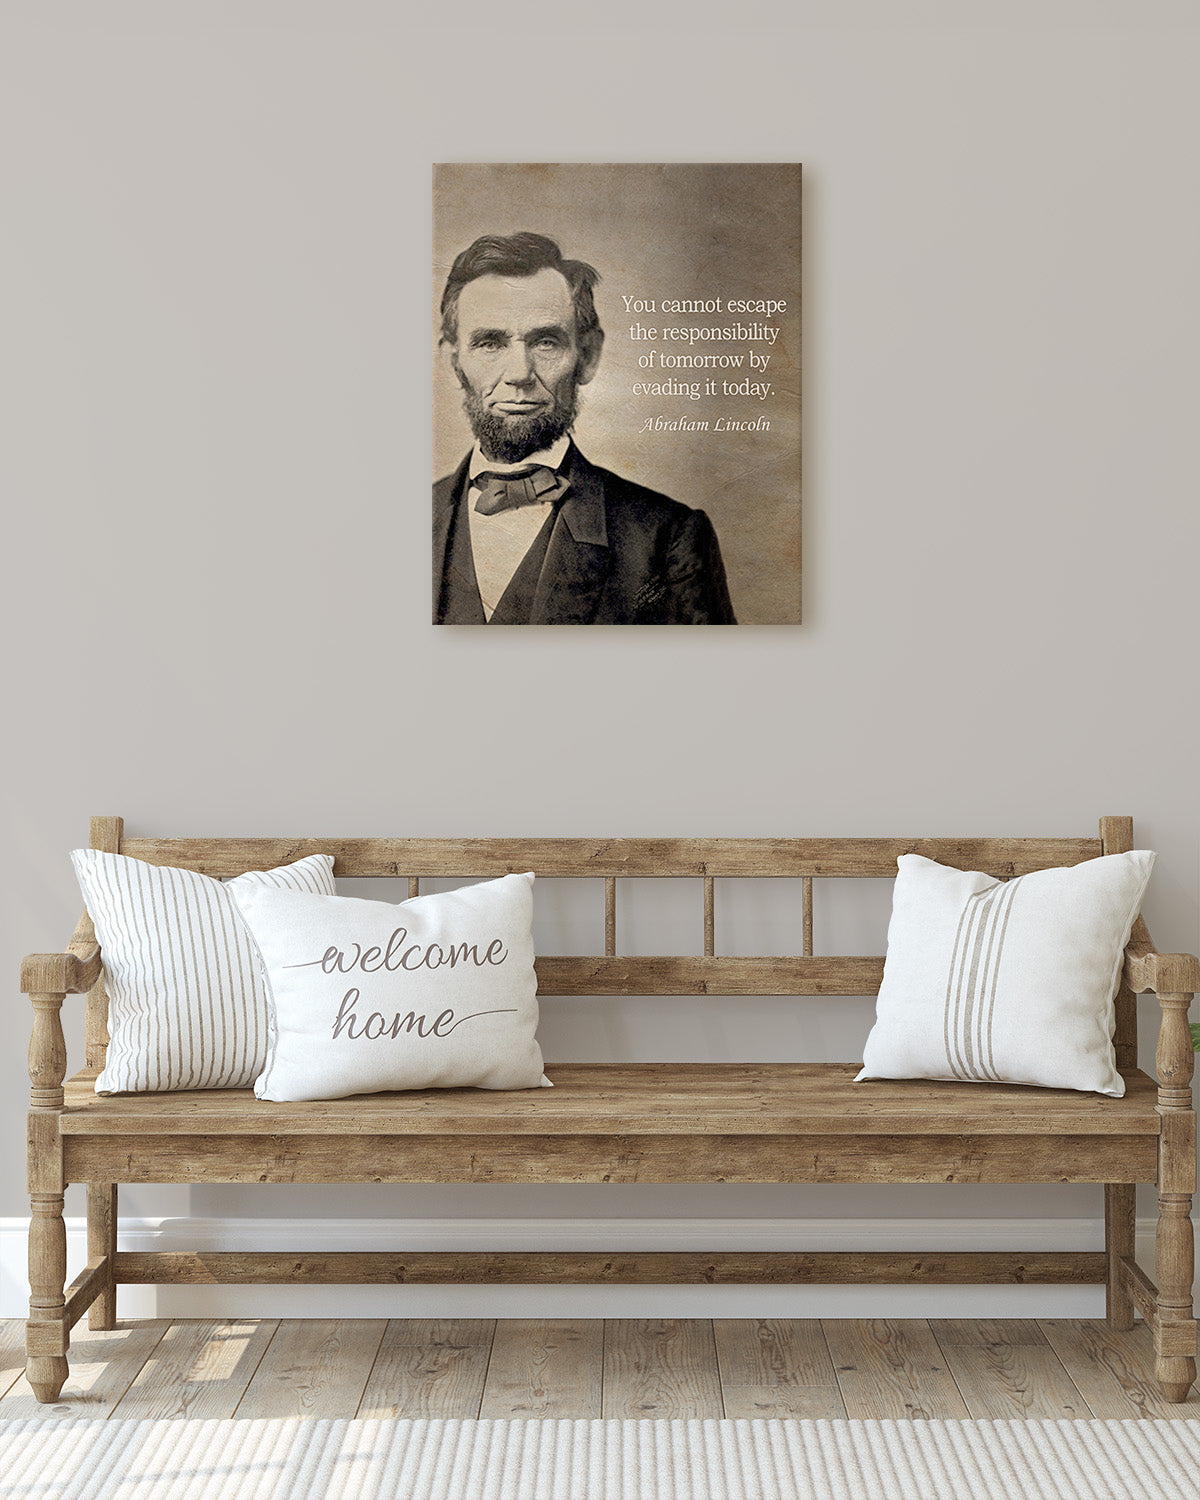 Abraham Lincoln Historic Quote - You cannot escape the responsibility - Great Inspirational Gift - Motivational Print - American Patriotic President